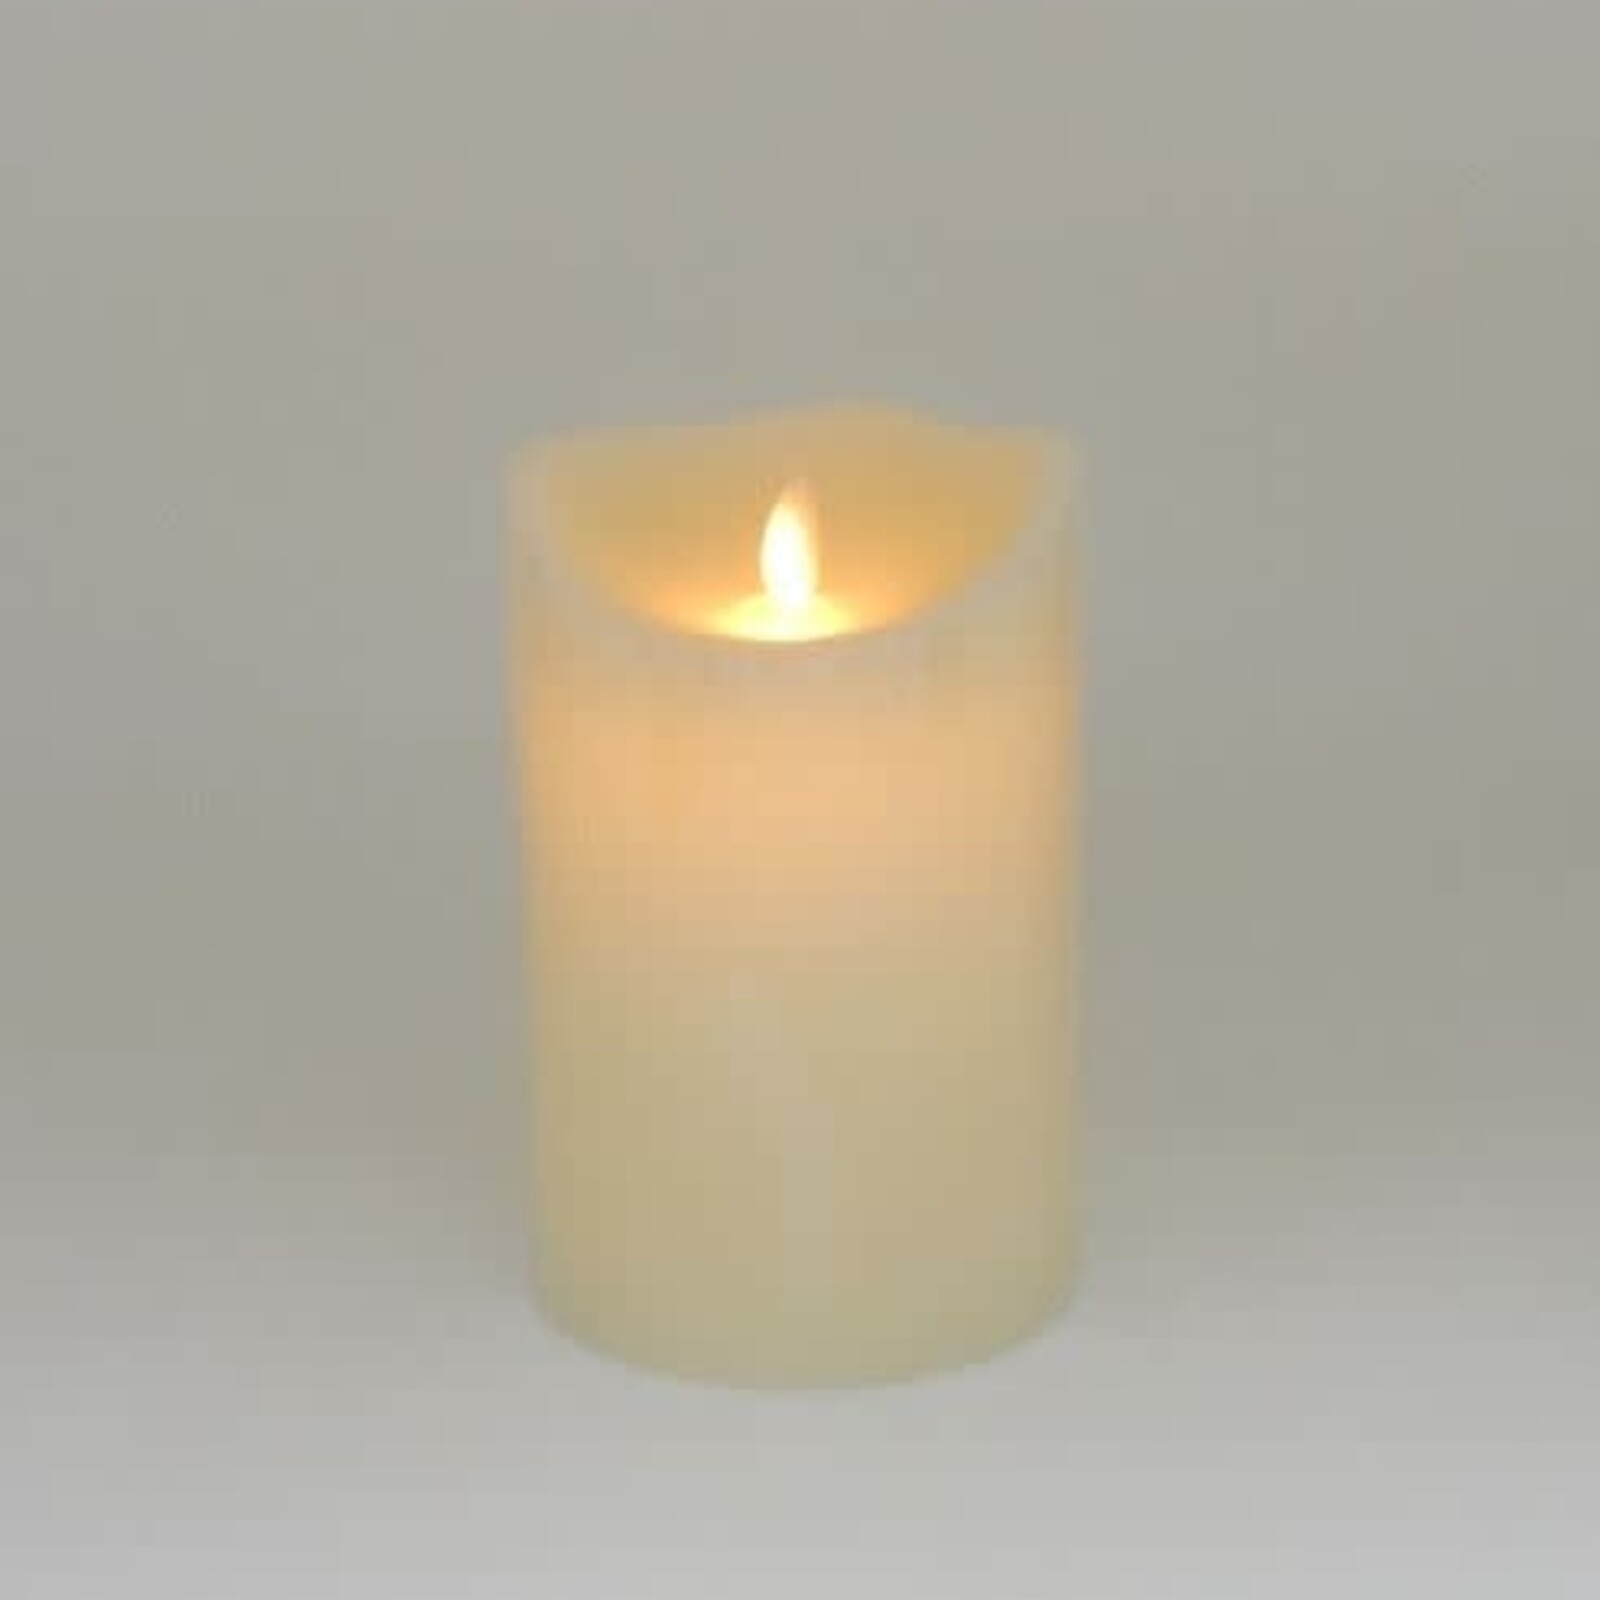 Green Pasture 4" X 8"  LED Flickering  candle Cream, 6 hours timer  LE010W loading=